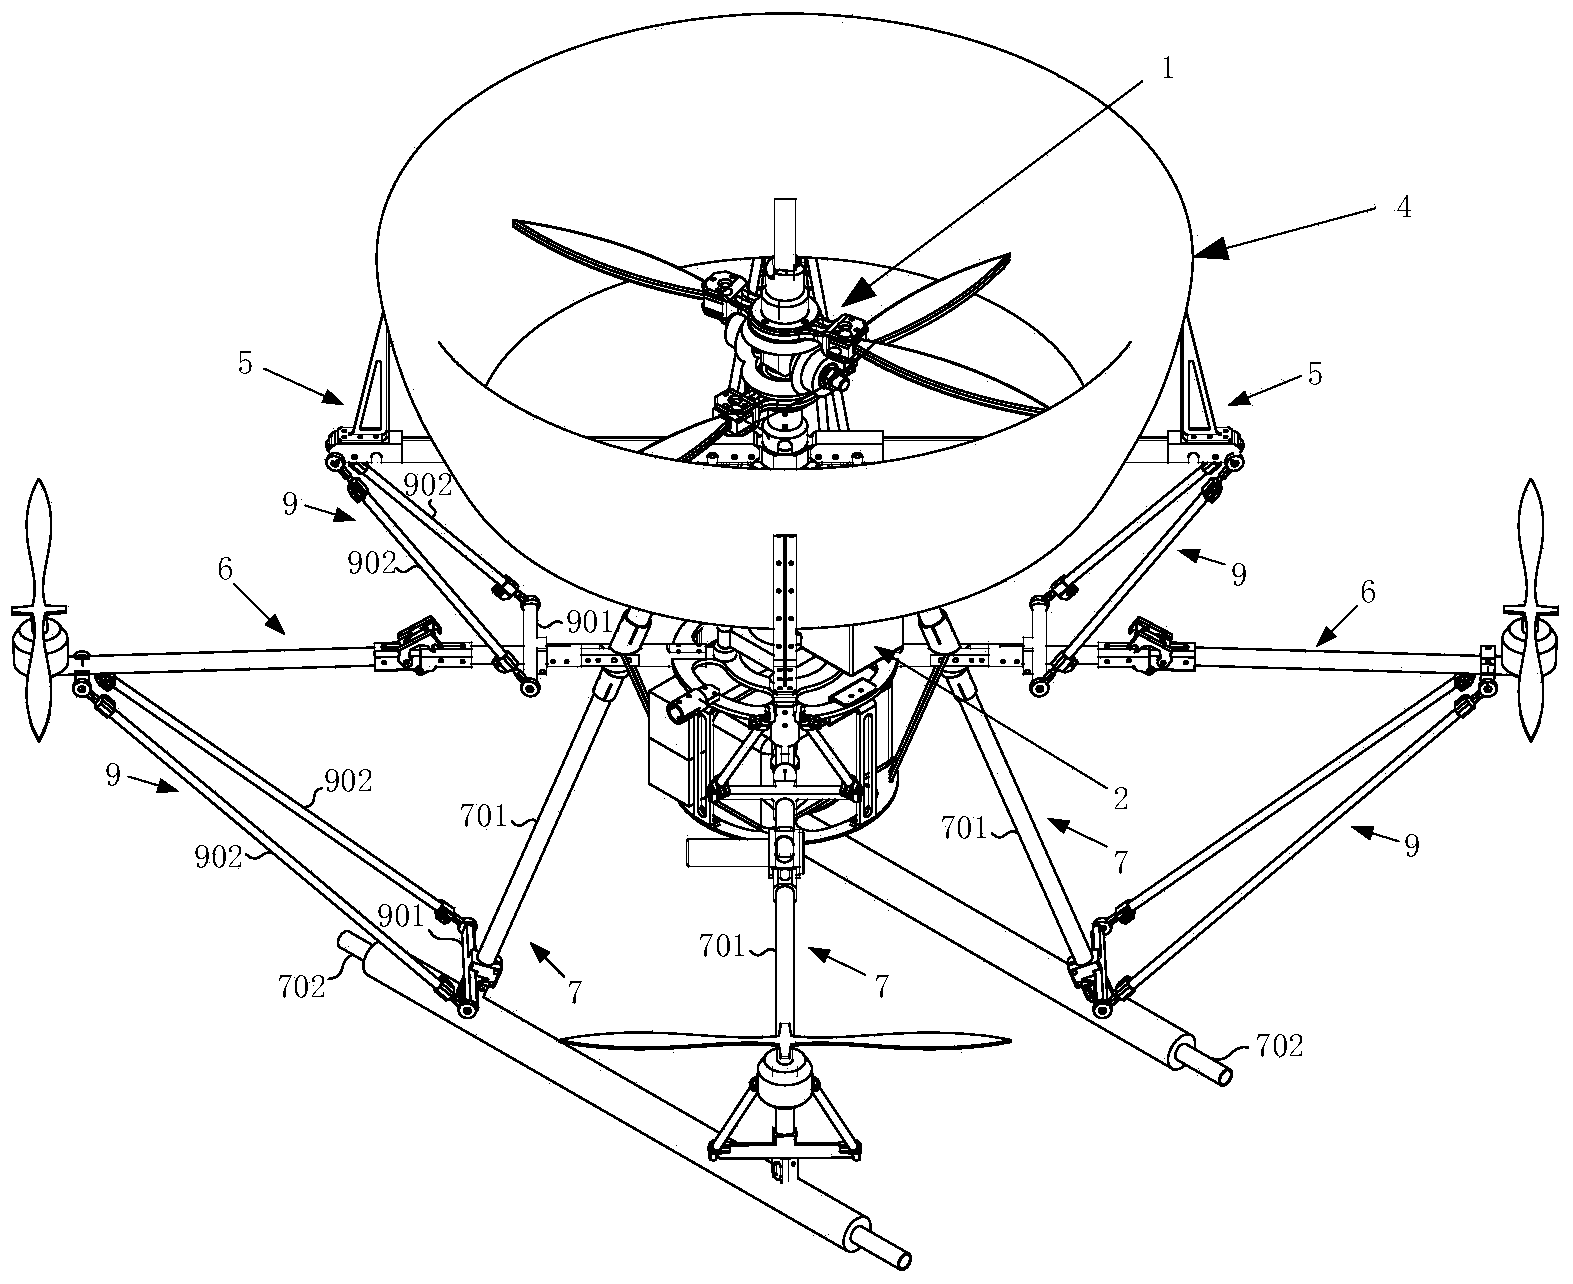 Combined type ducted aerial reconnaissance robot